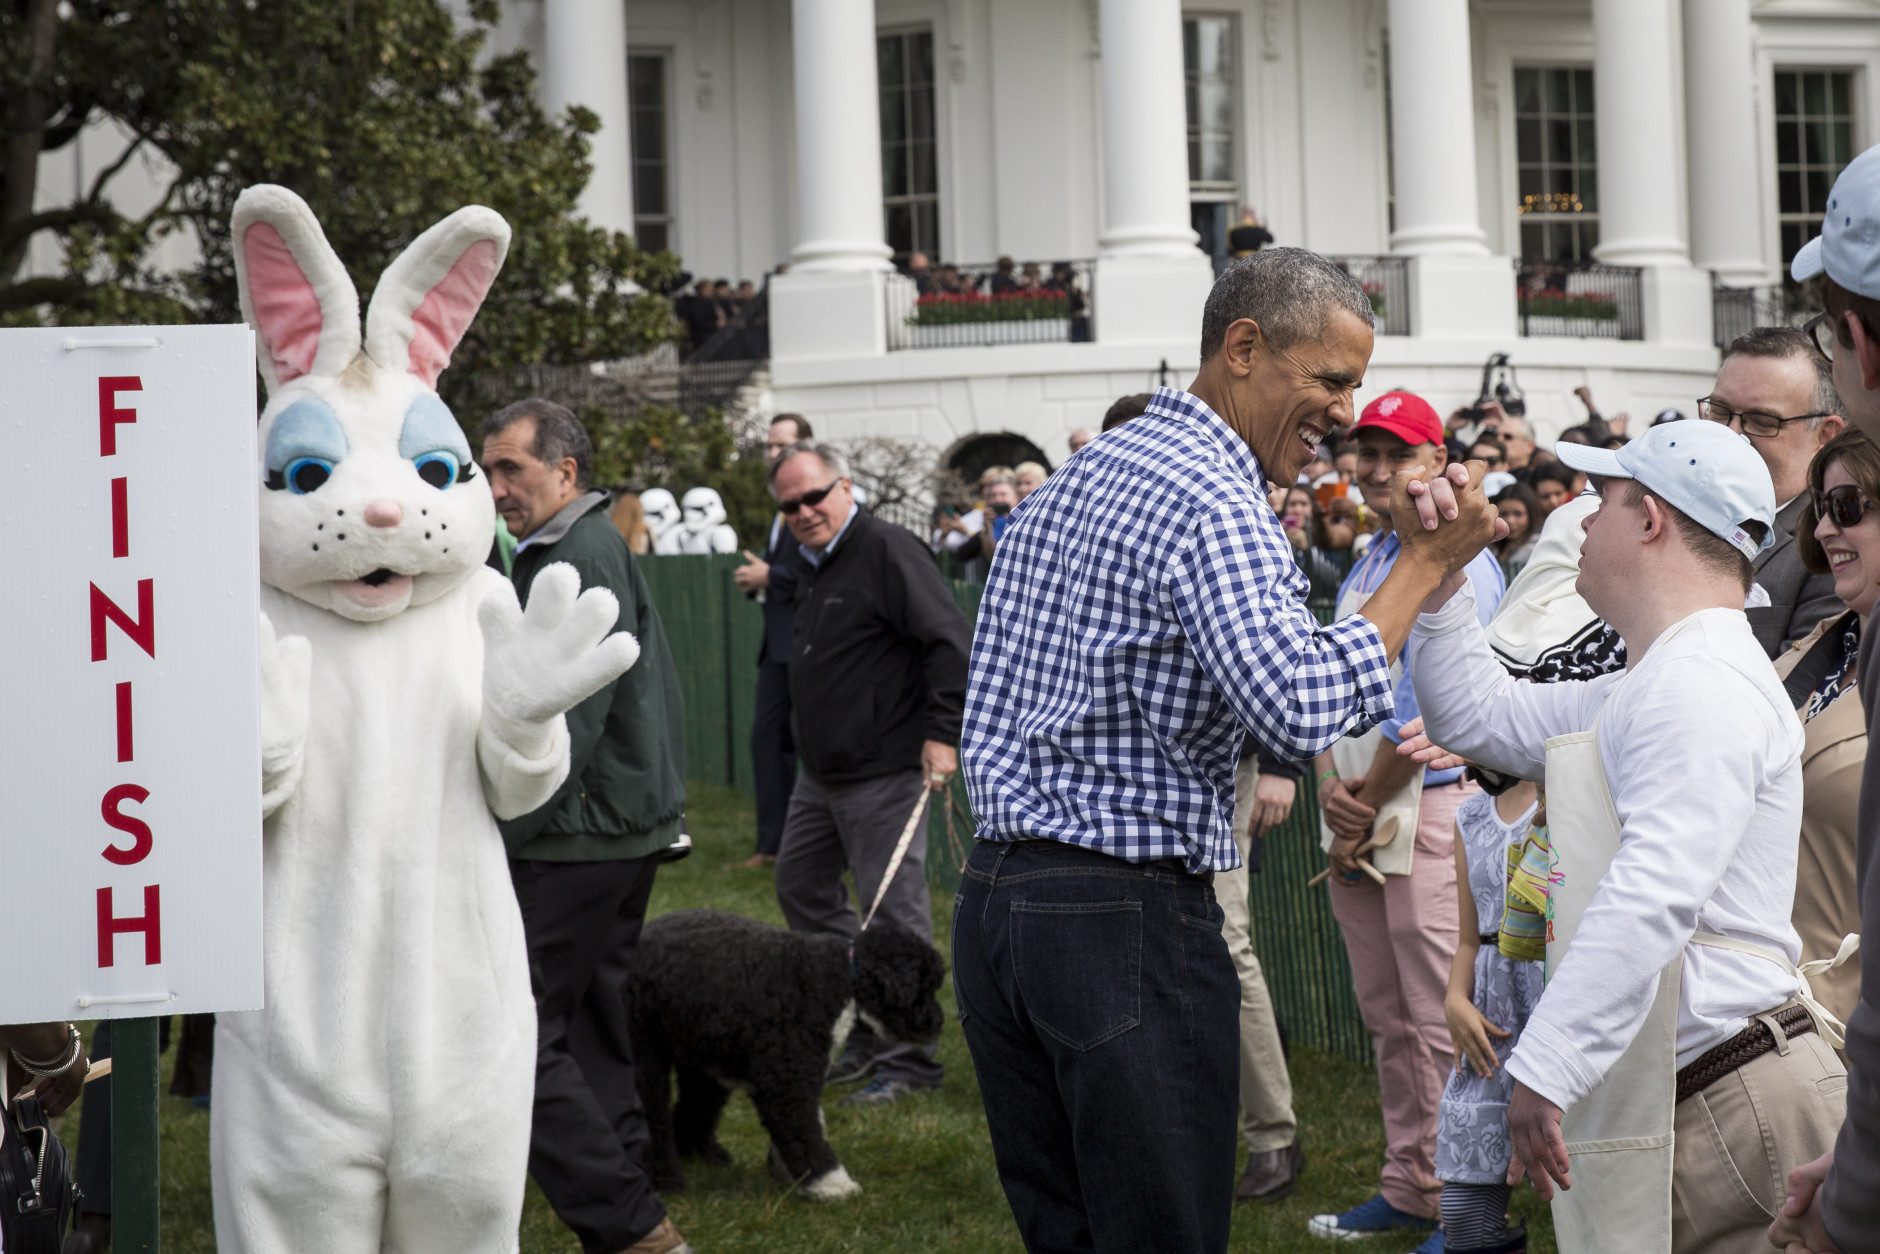 WASHINGTON, DC - MARCH 28: President Barack Obama shakes hands with an attendee during the annual White House Easter Egg Roll on the South Lawn of the White House March 28, 2016 in Washington, DC. The tradition dates back to 1878 when President Rutherford B. Hayes allowed children to roll eggs on the South Lawn. (Photo by Drew Angerer/Getty Images)